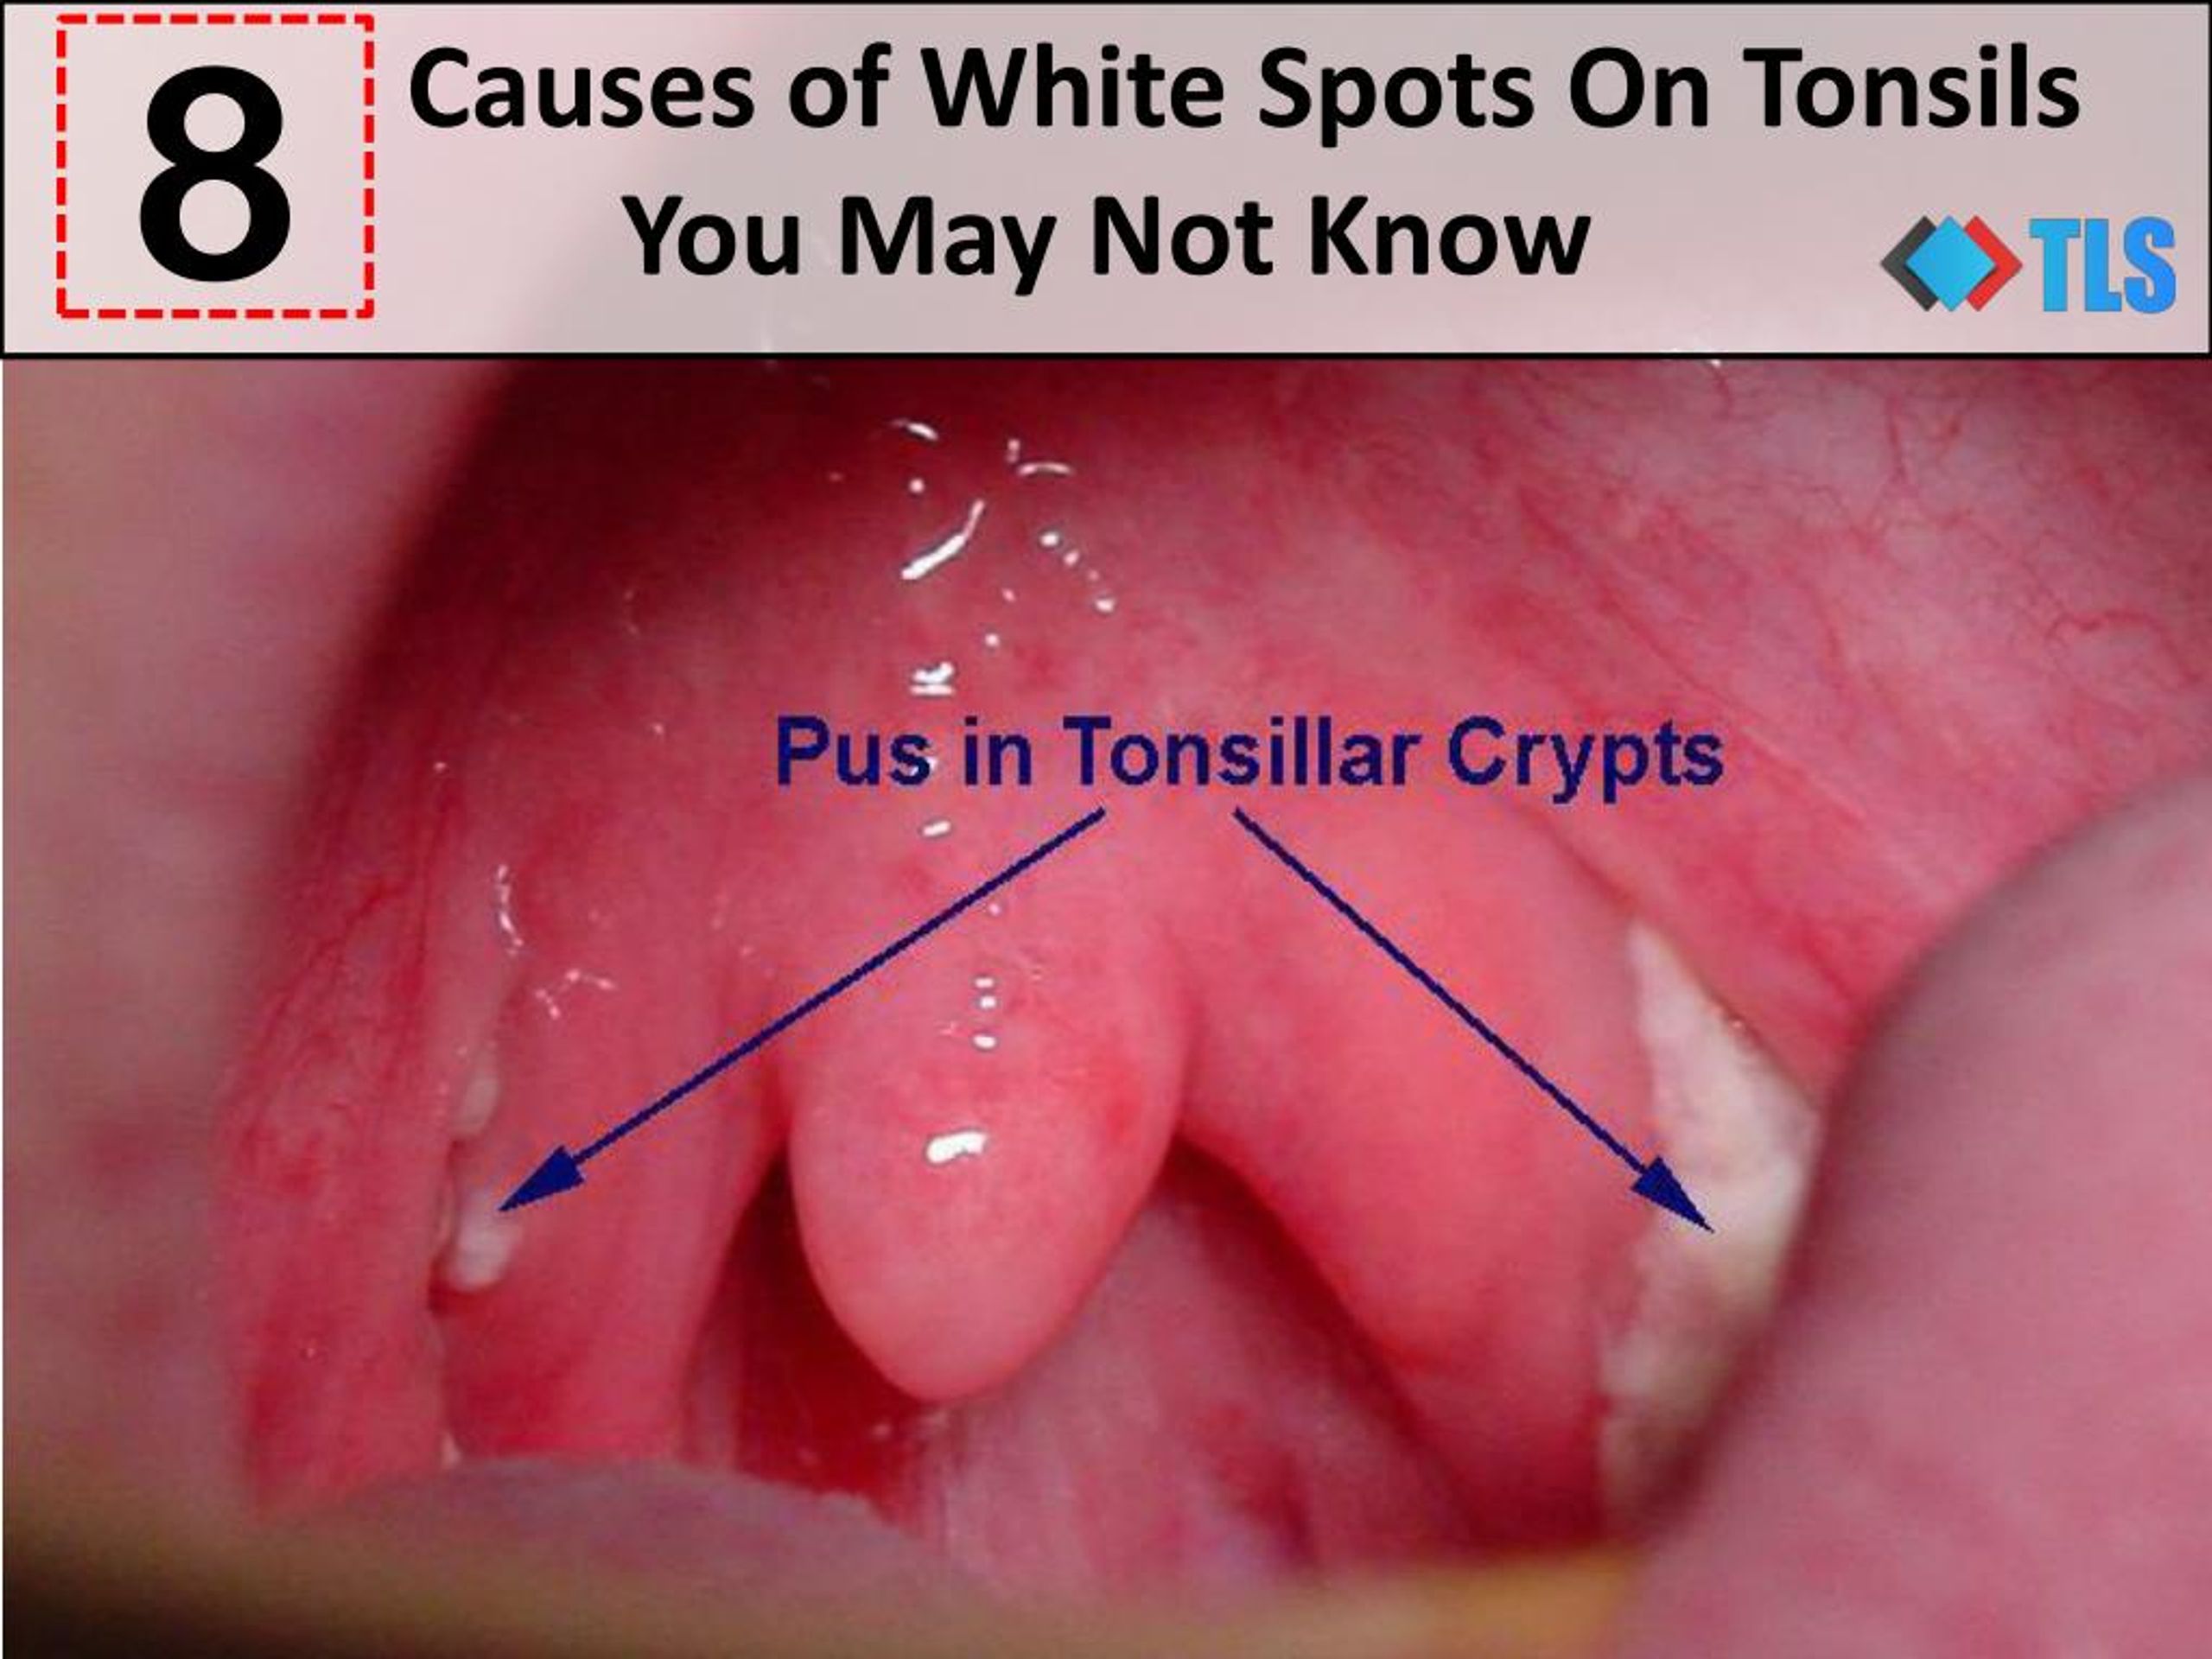 Ppt 8 Causes Of White Spots On Tonsils You May Not Know Powerpoint Presentation Id7321615